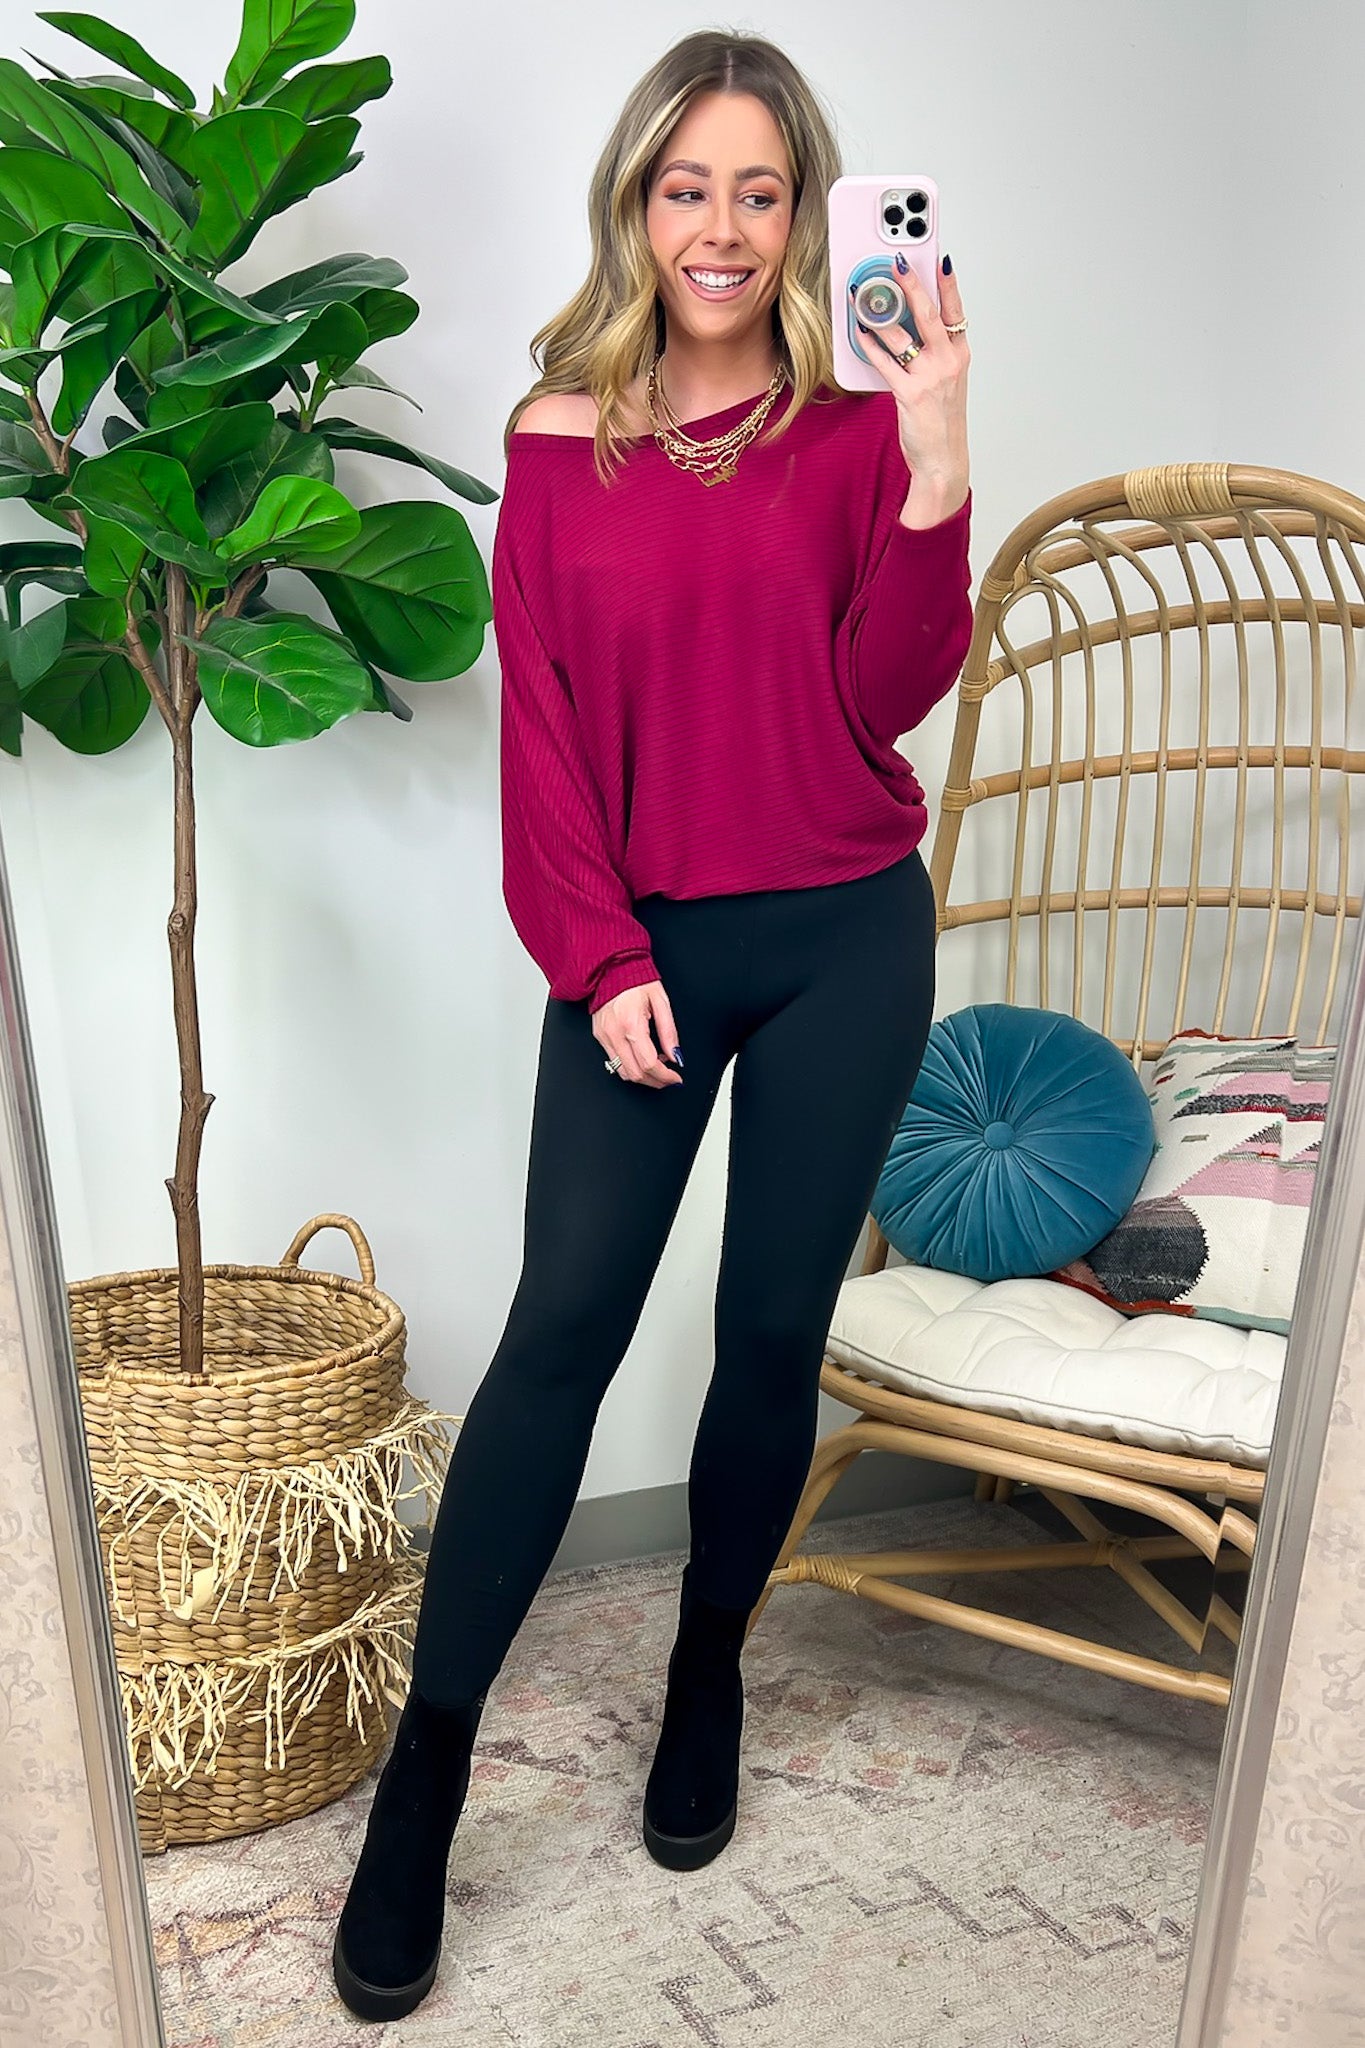  Gineva Ribbed Batwing Boatneck Lightweight Sweater - FINAL SALE - Madison and Mallory